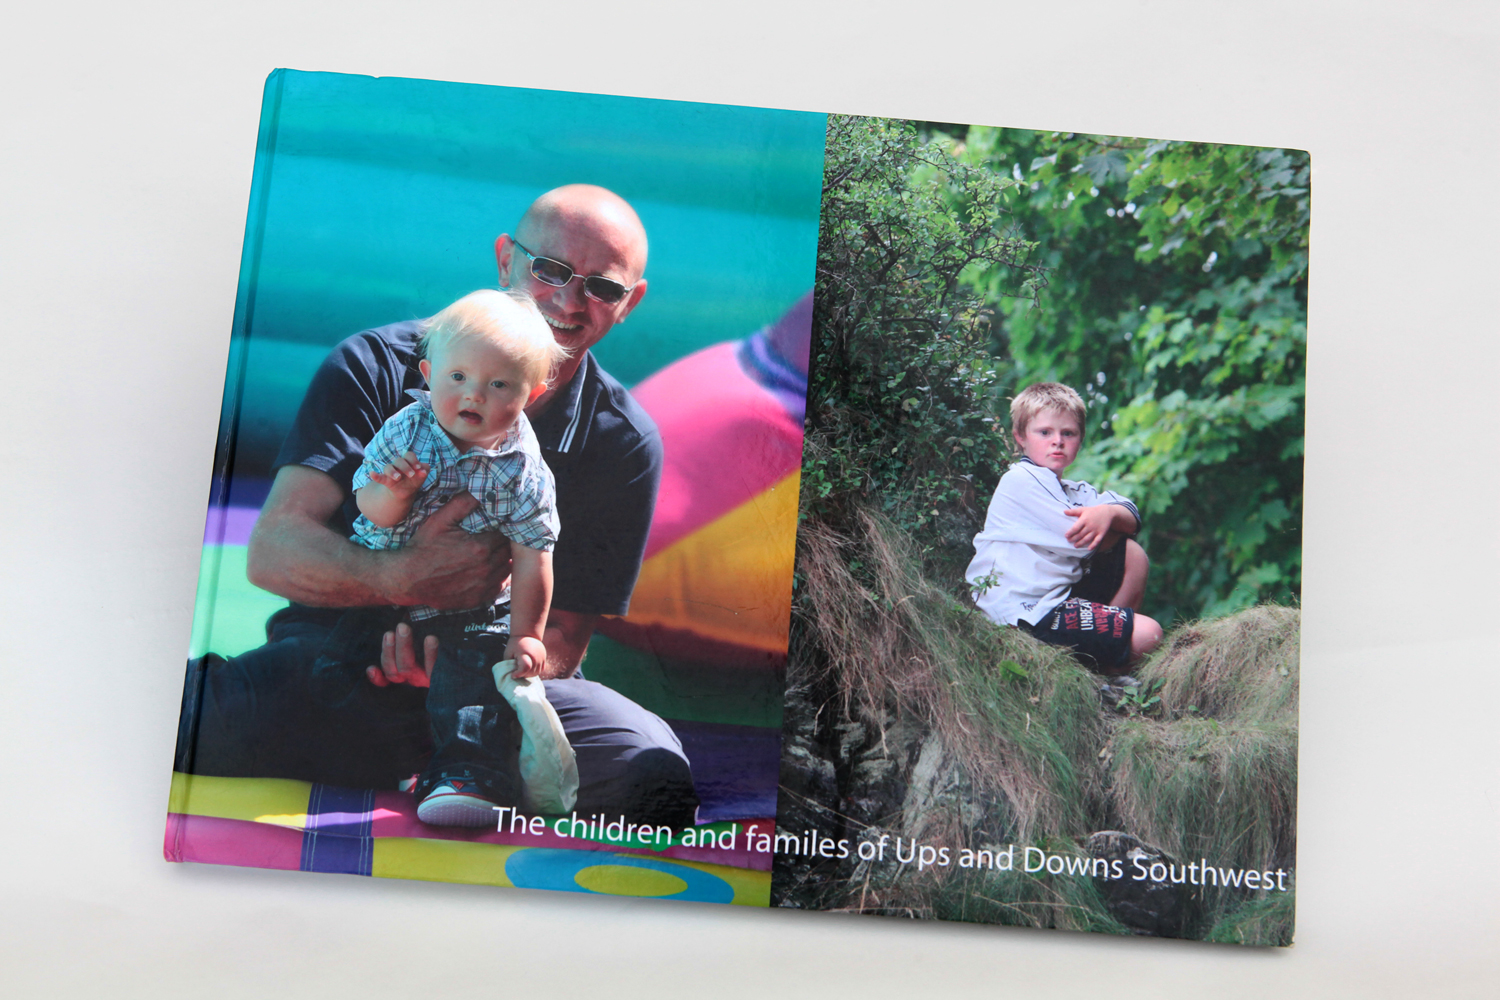 Photo Book of children and families of Ups and Downs Southwest